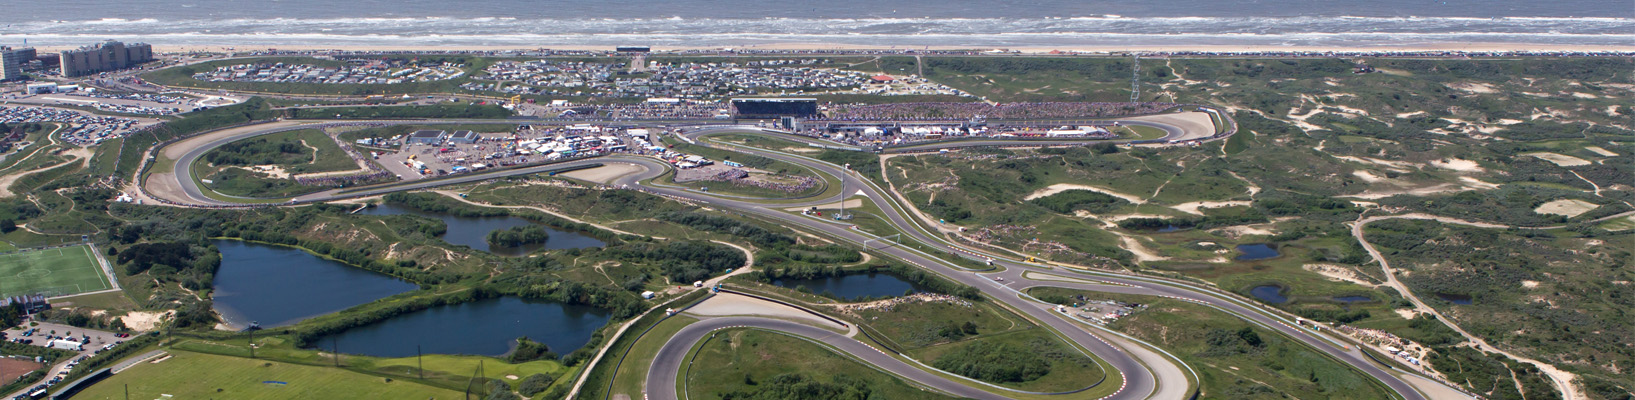 NOW TAKE A CHANCE WITH PORSCHE DESIGN FOR A SPECTACULAR RACE EXPERIENCE ON CIRCUIT ZANDVOORT